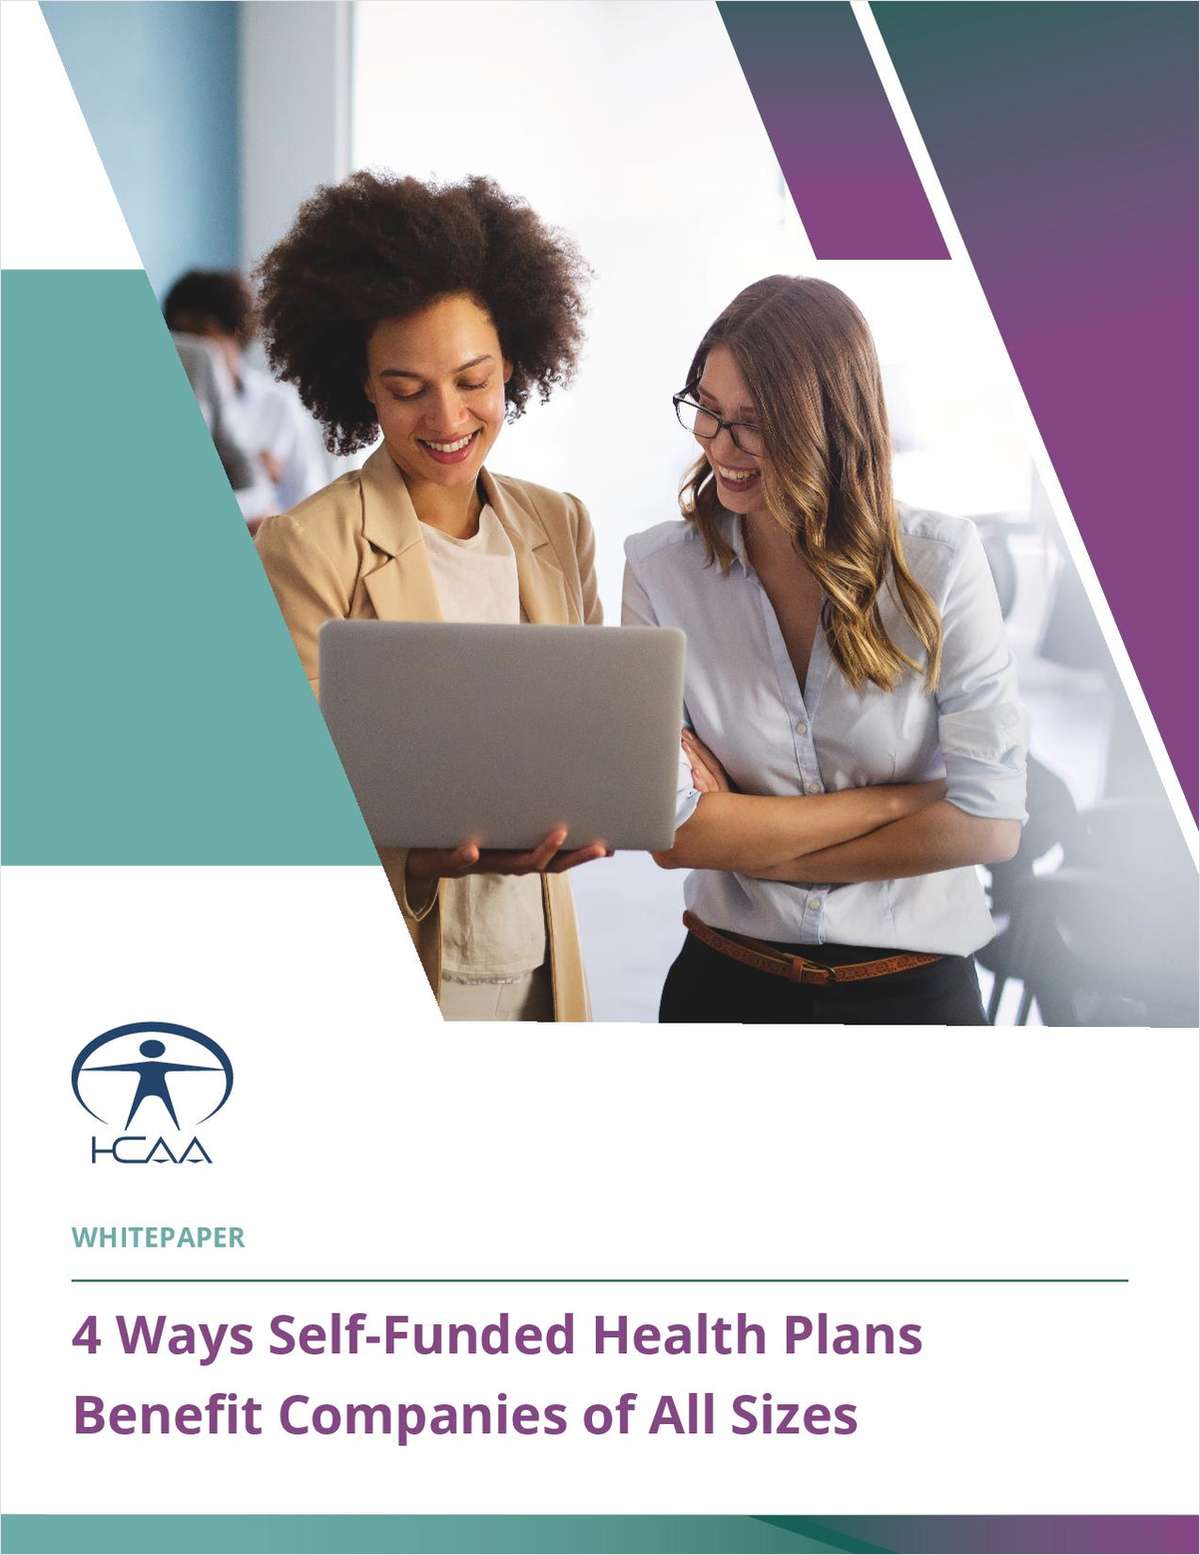 4 Ways Self-Funded Health Plans Benefit Companies of All Sizes link